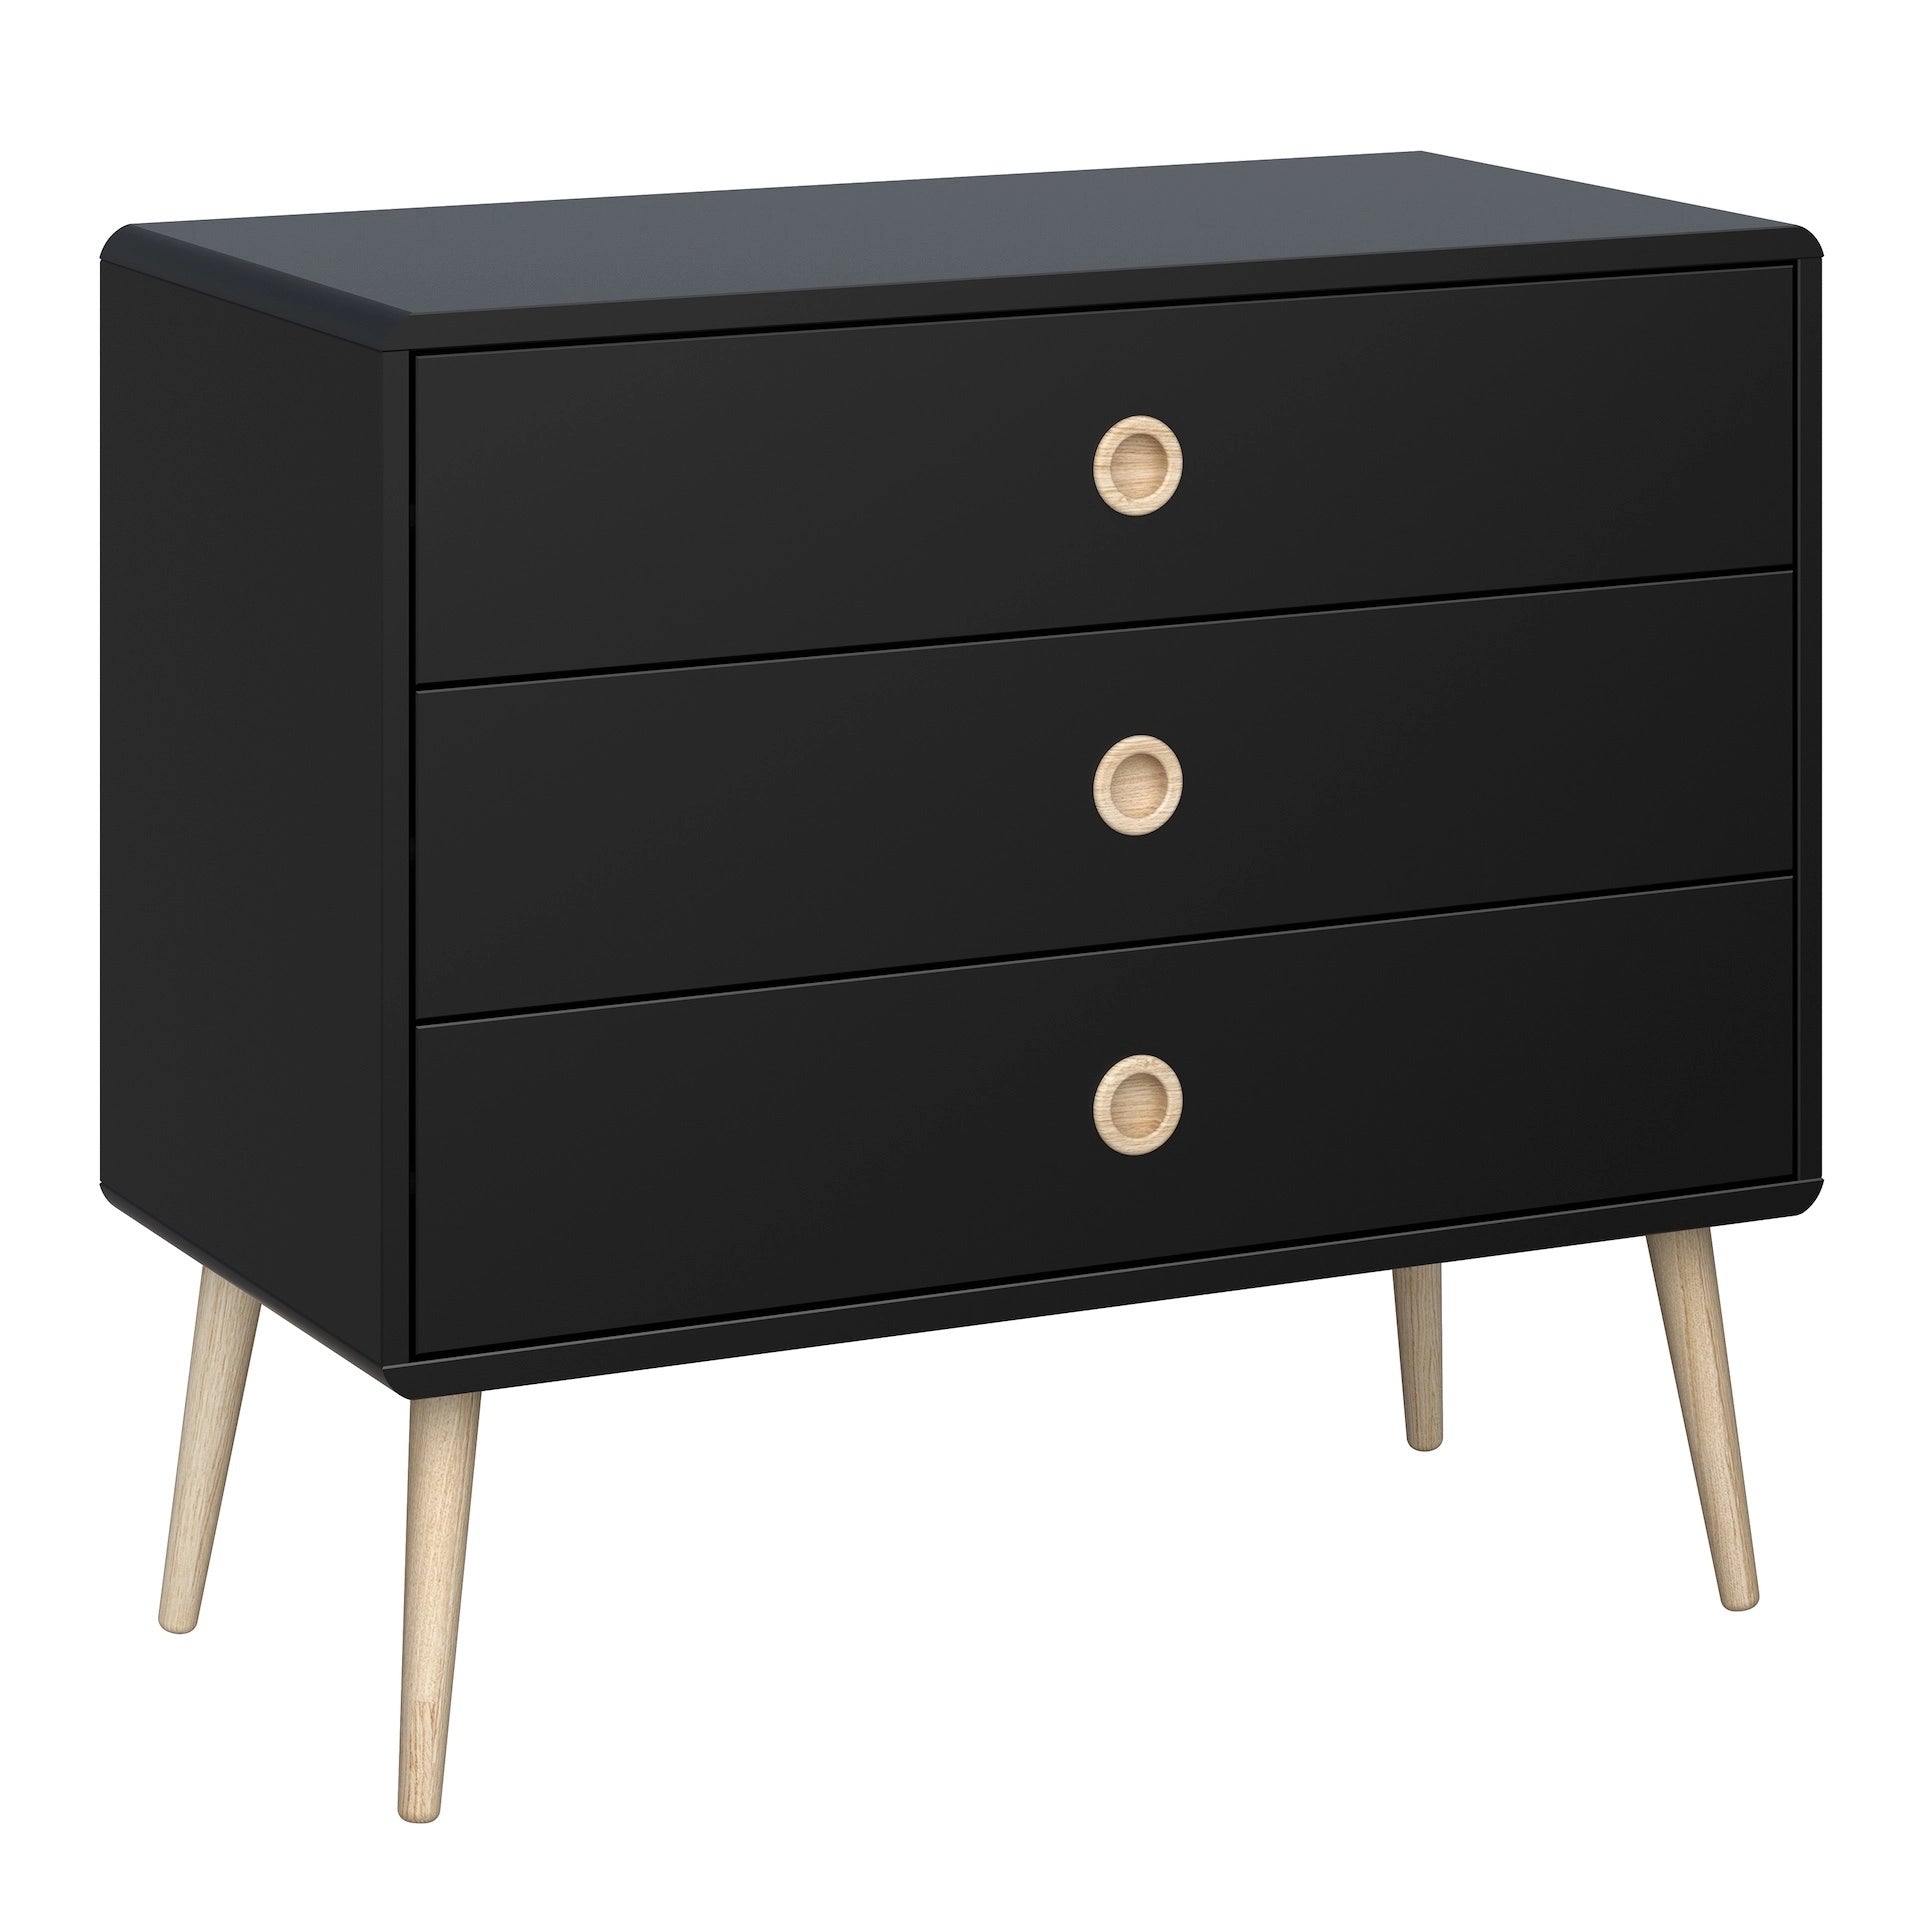 Furniture To Go Softline 3 Drawer Wide Chest Black Painted